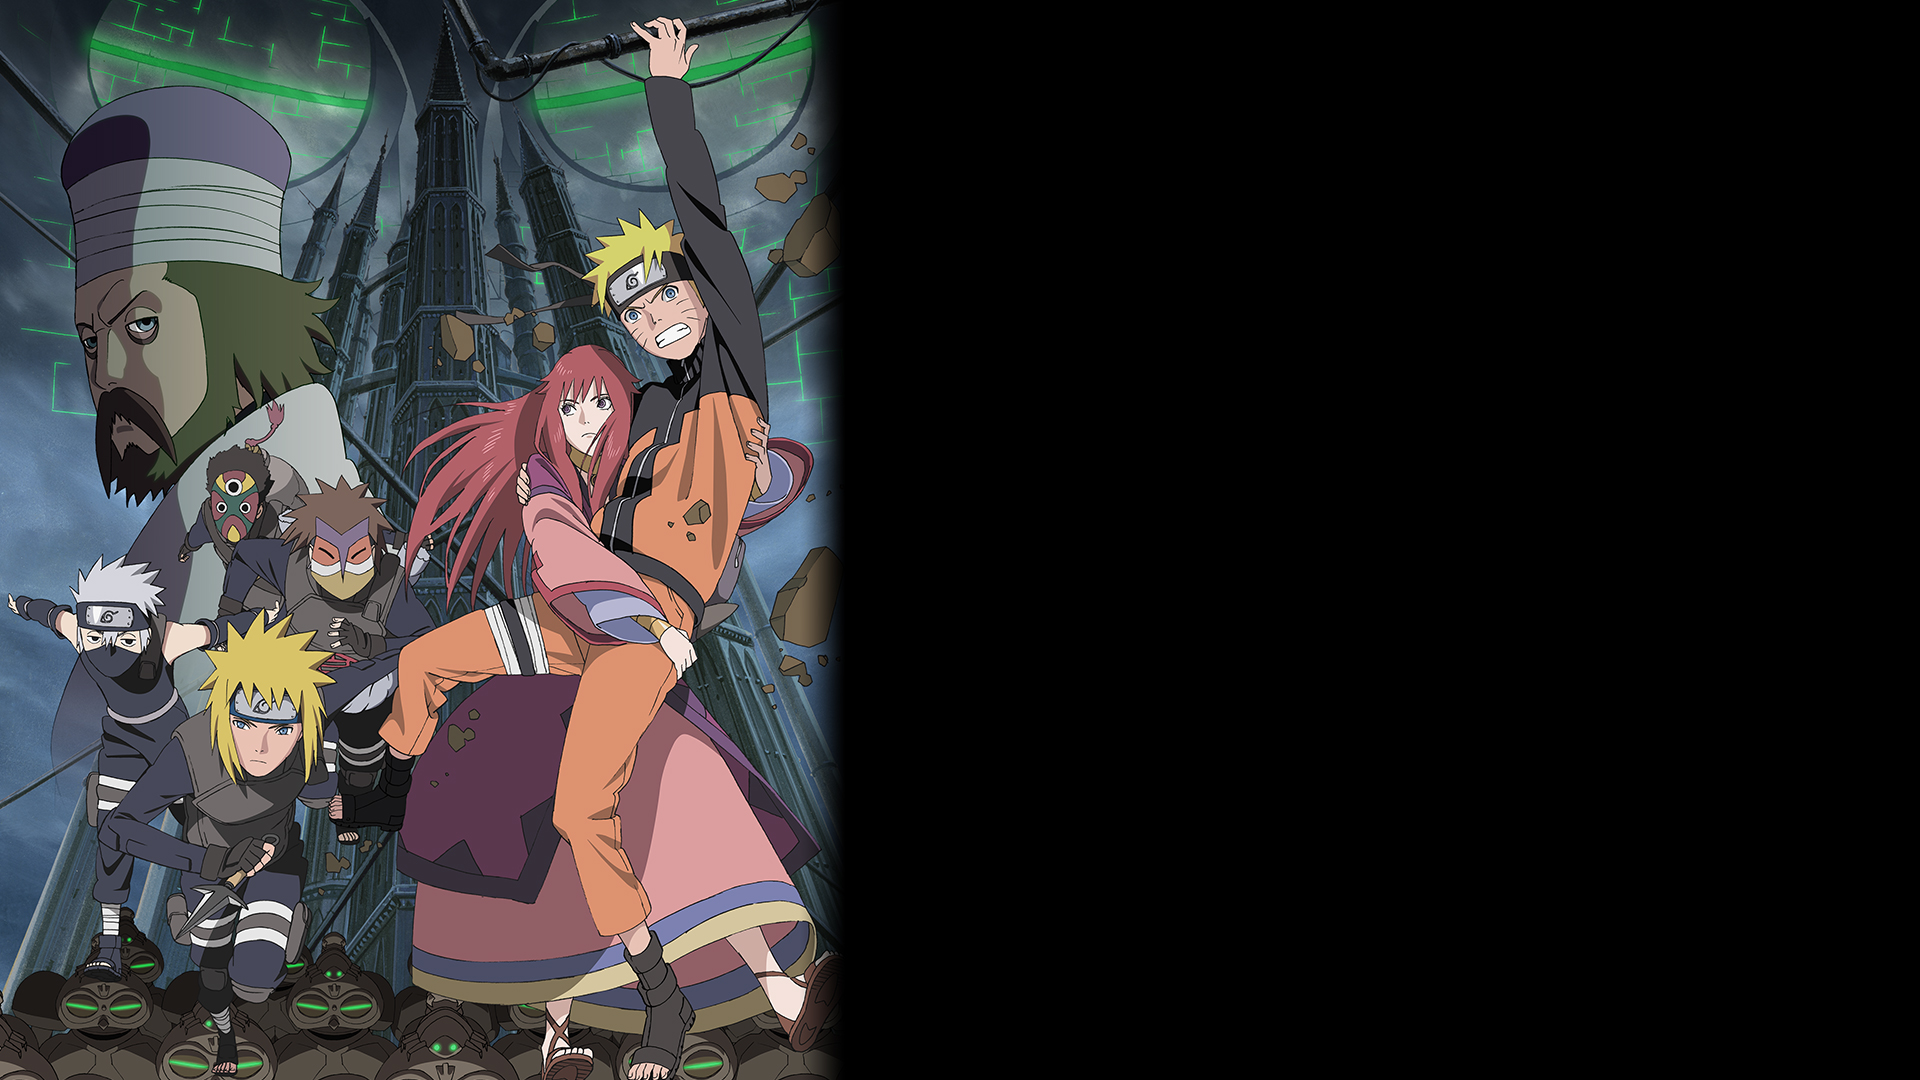 Naruto The Lost Tower - Trailer - Vidéo Dailymotion